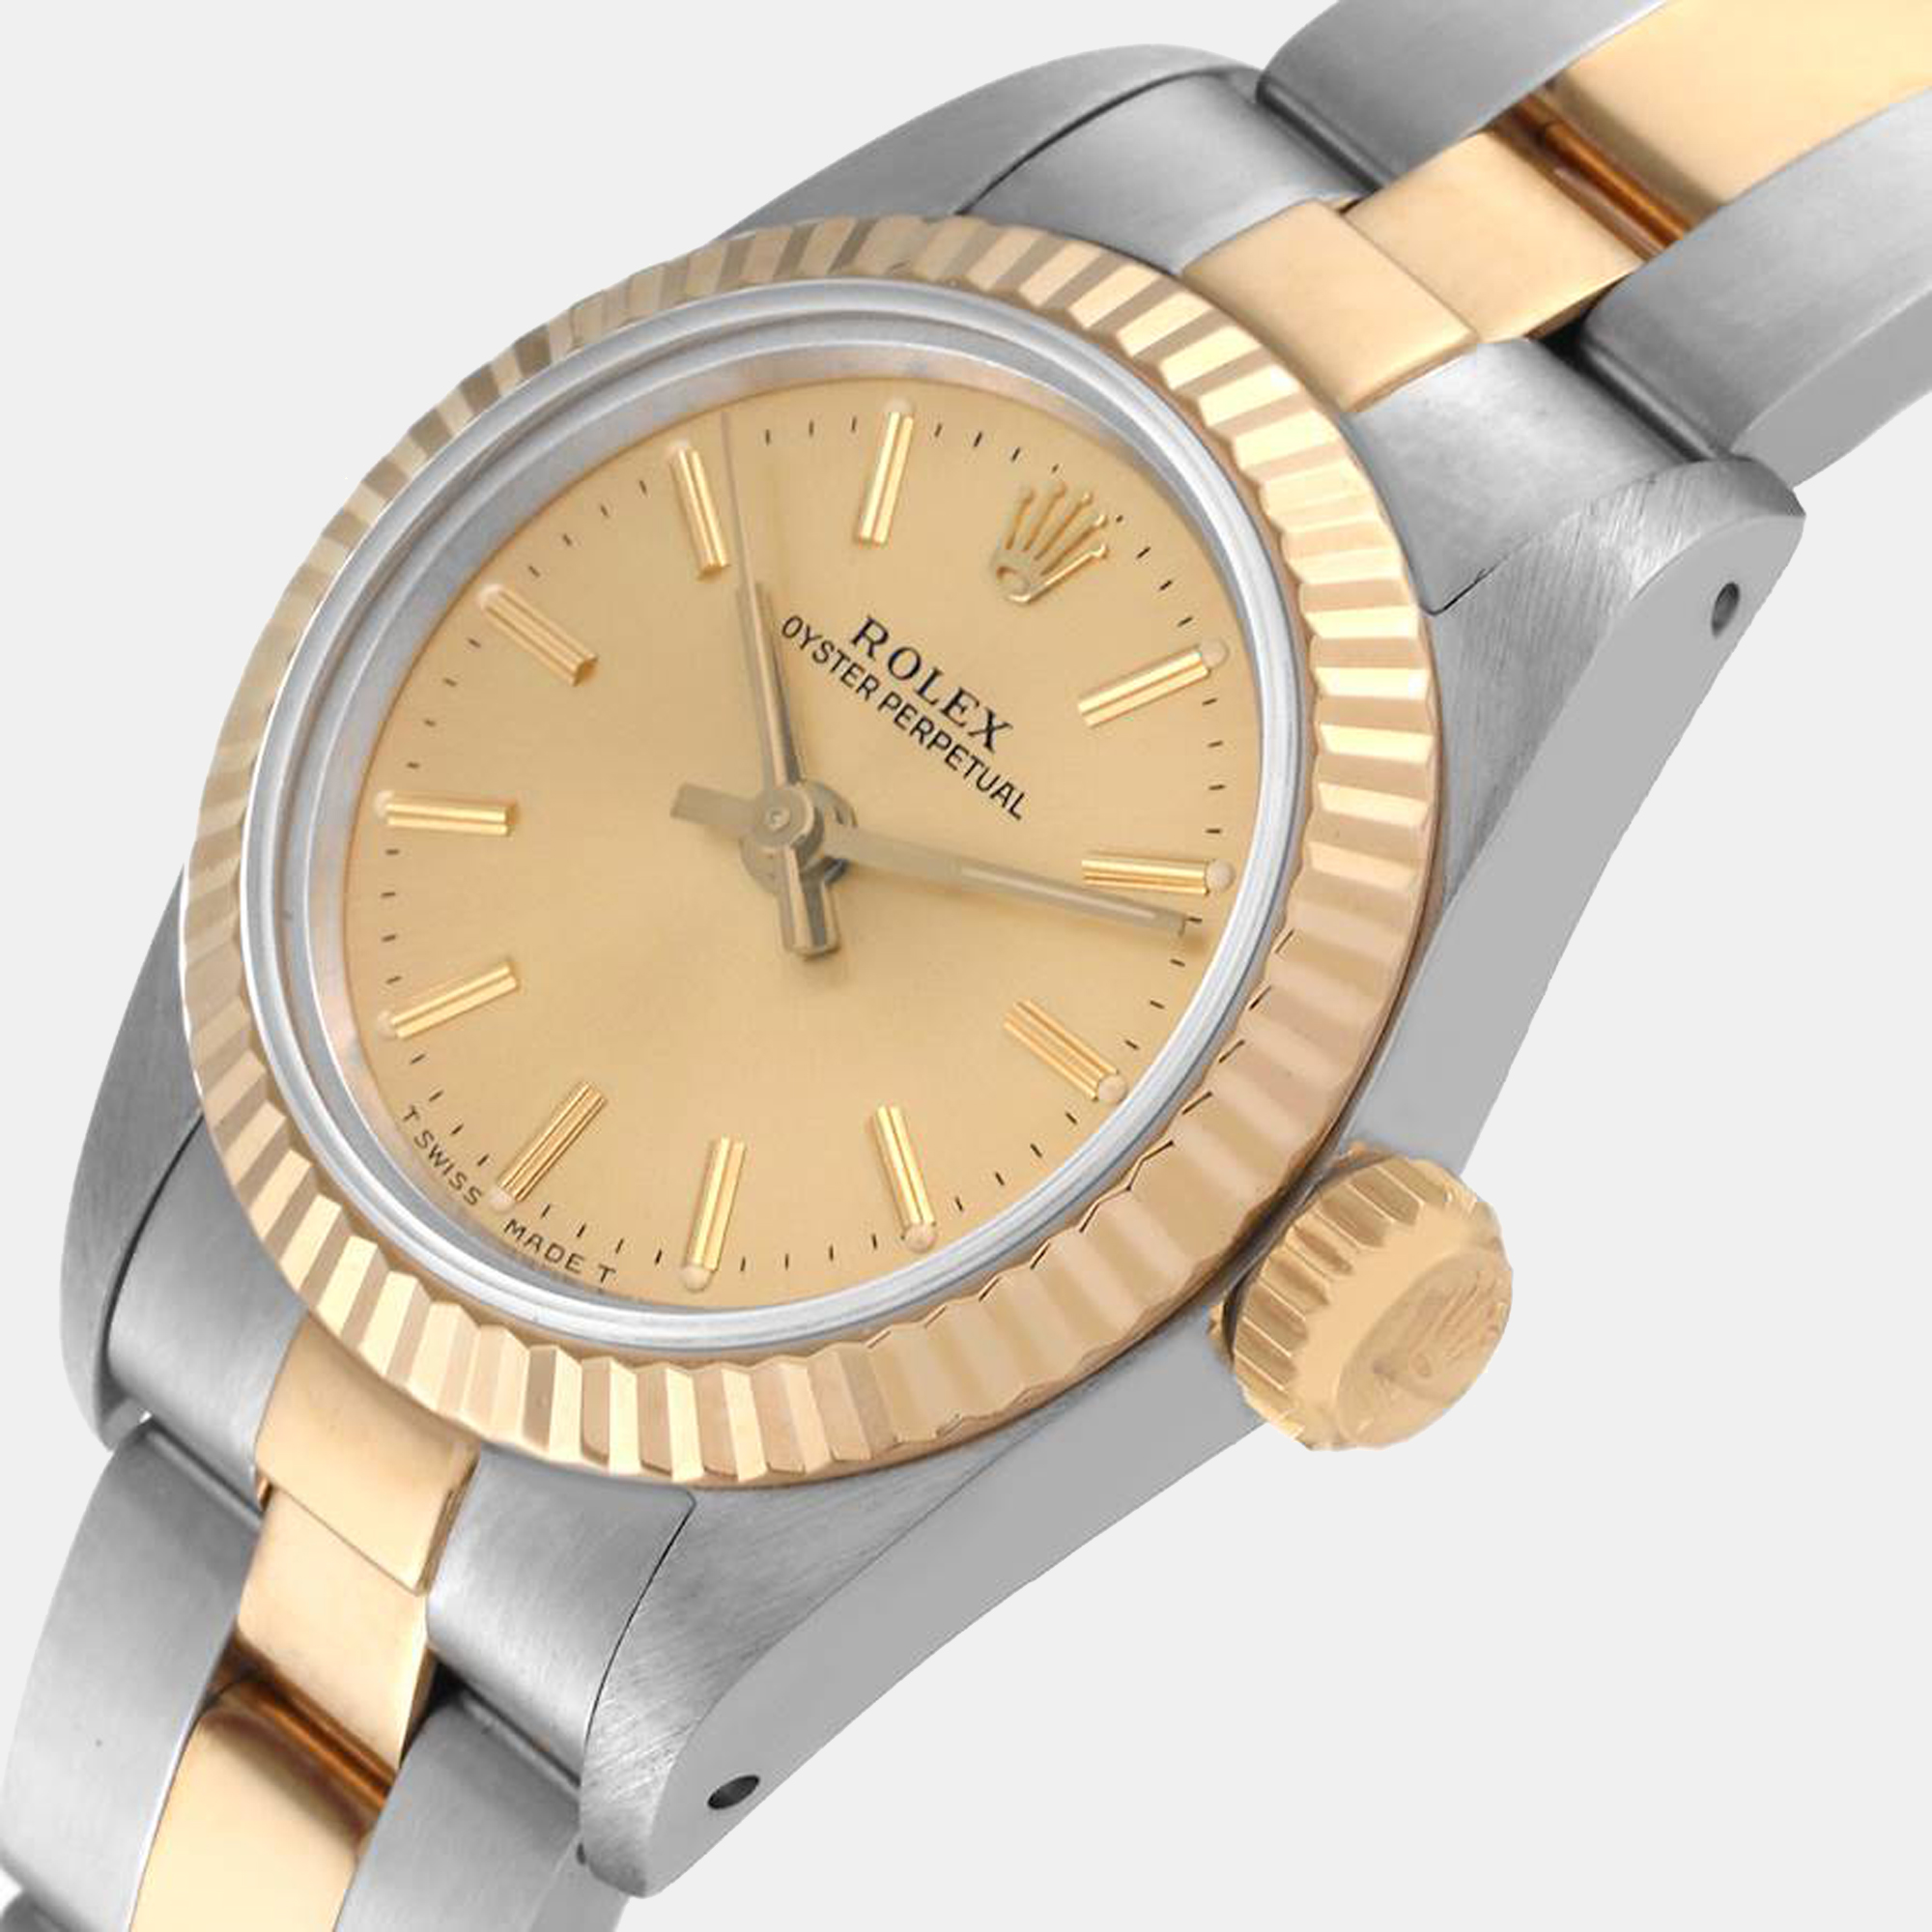 

Rolex Champagne 18K Yellow Gold And Stainless Steel Oyster Perpetual 67193 Women's Wristwatch 24 mm